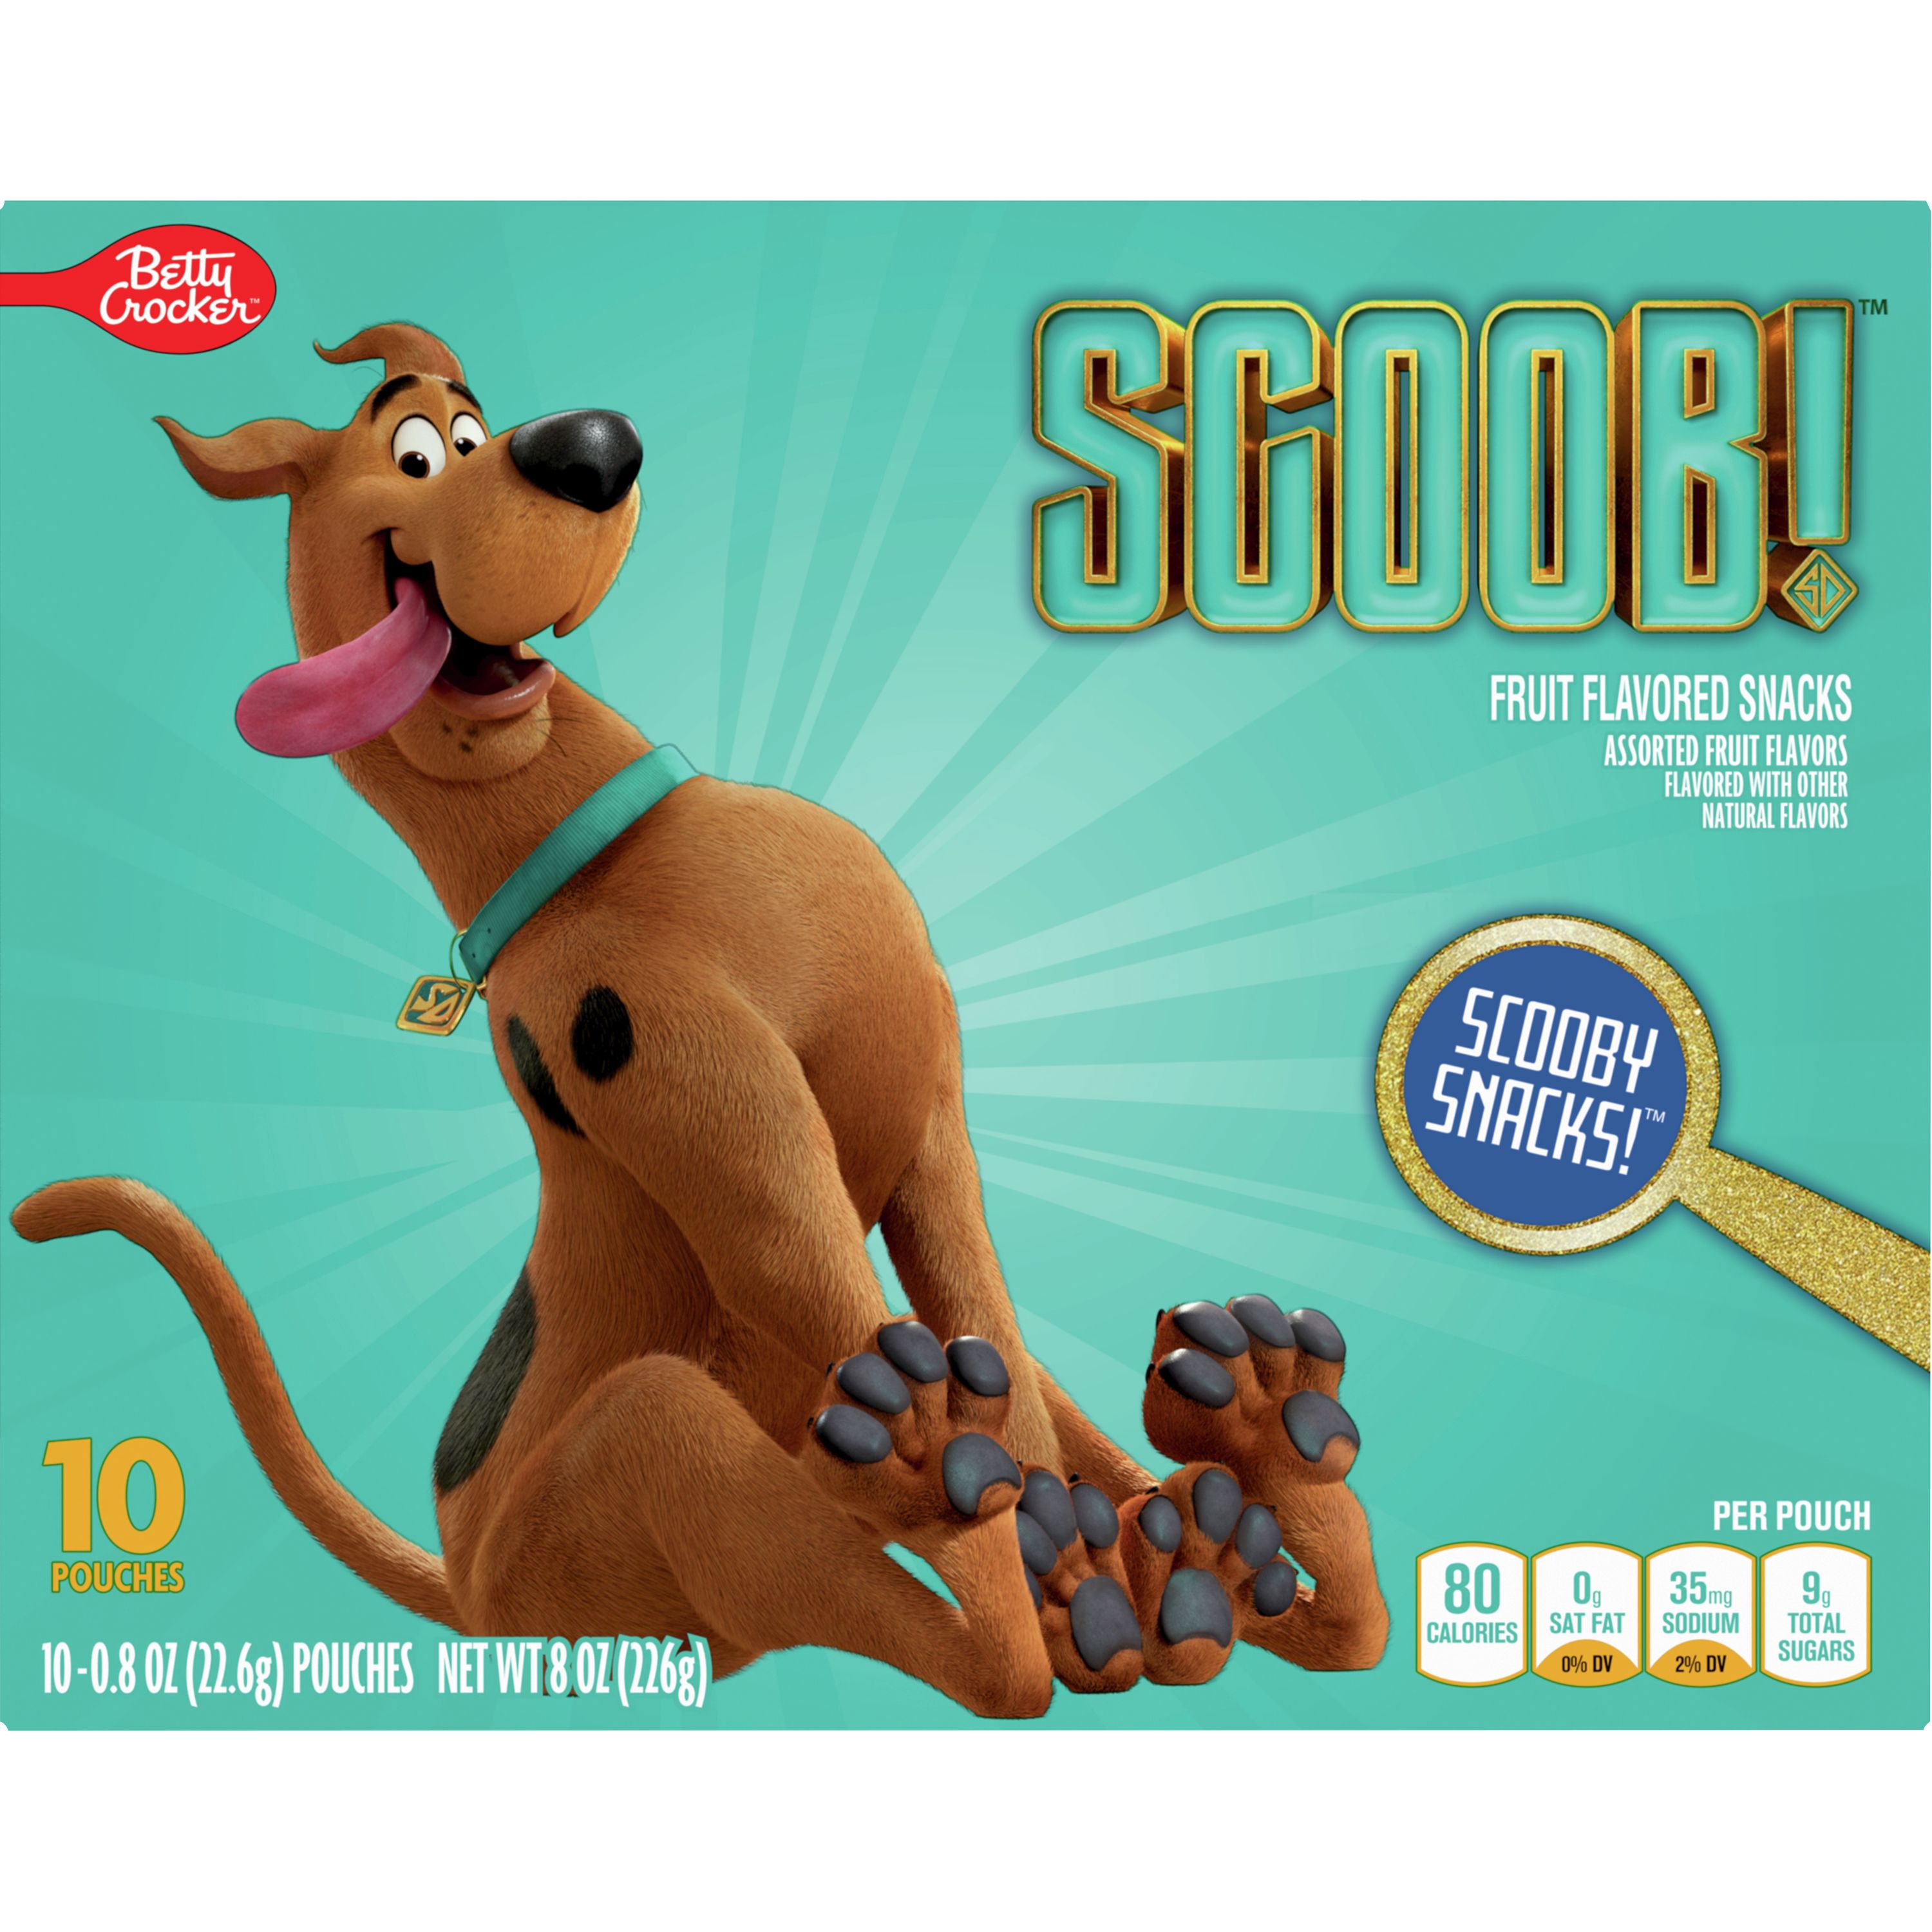 are scooby snacks good for dogs